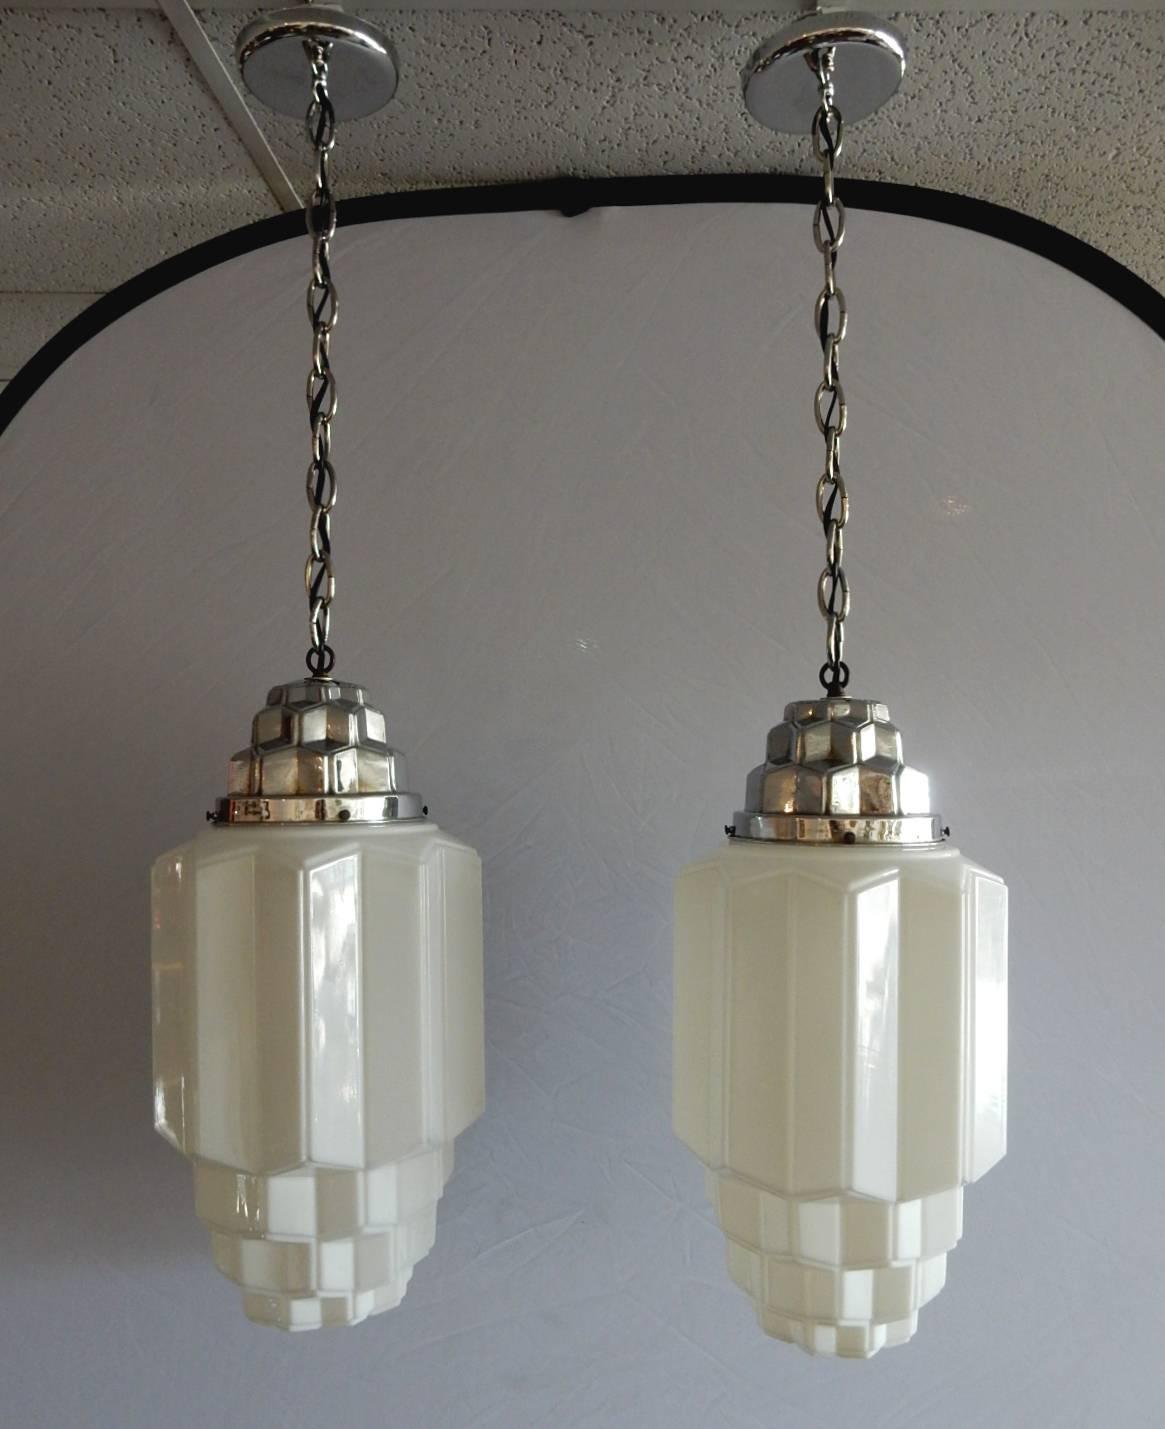 This set of commercial or theatre pendants made of thin hand formed milk glass with nickel-plated cap that identically mimics the cubist design, circa 1930s.
Each takes a single standard light bulb. New chrome chain, wiring and ceiling cap.